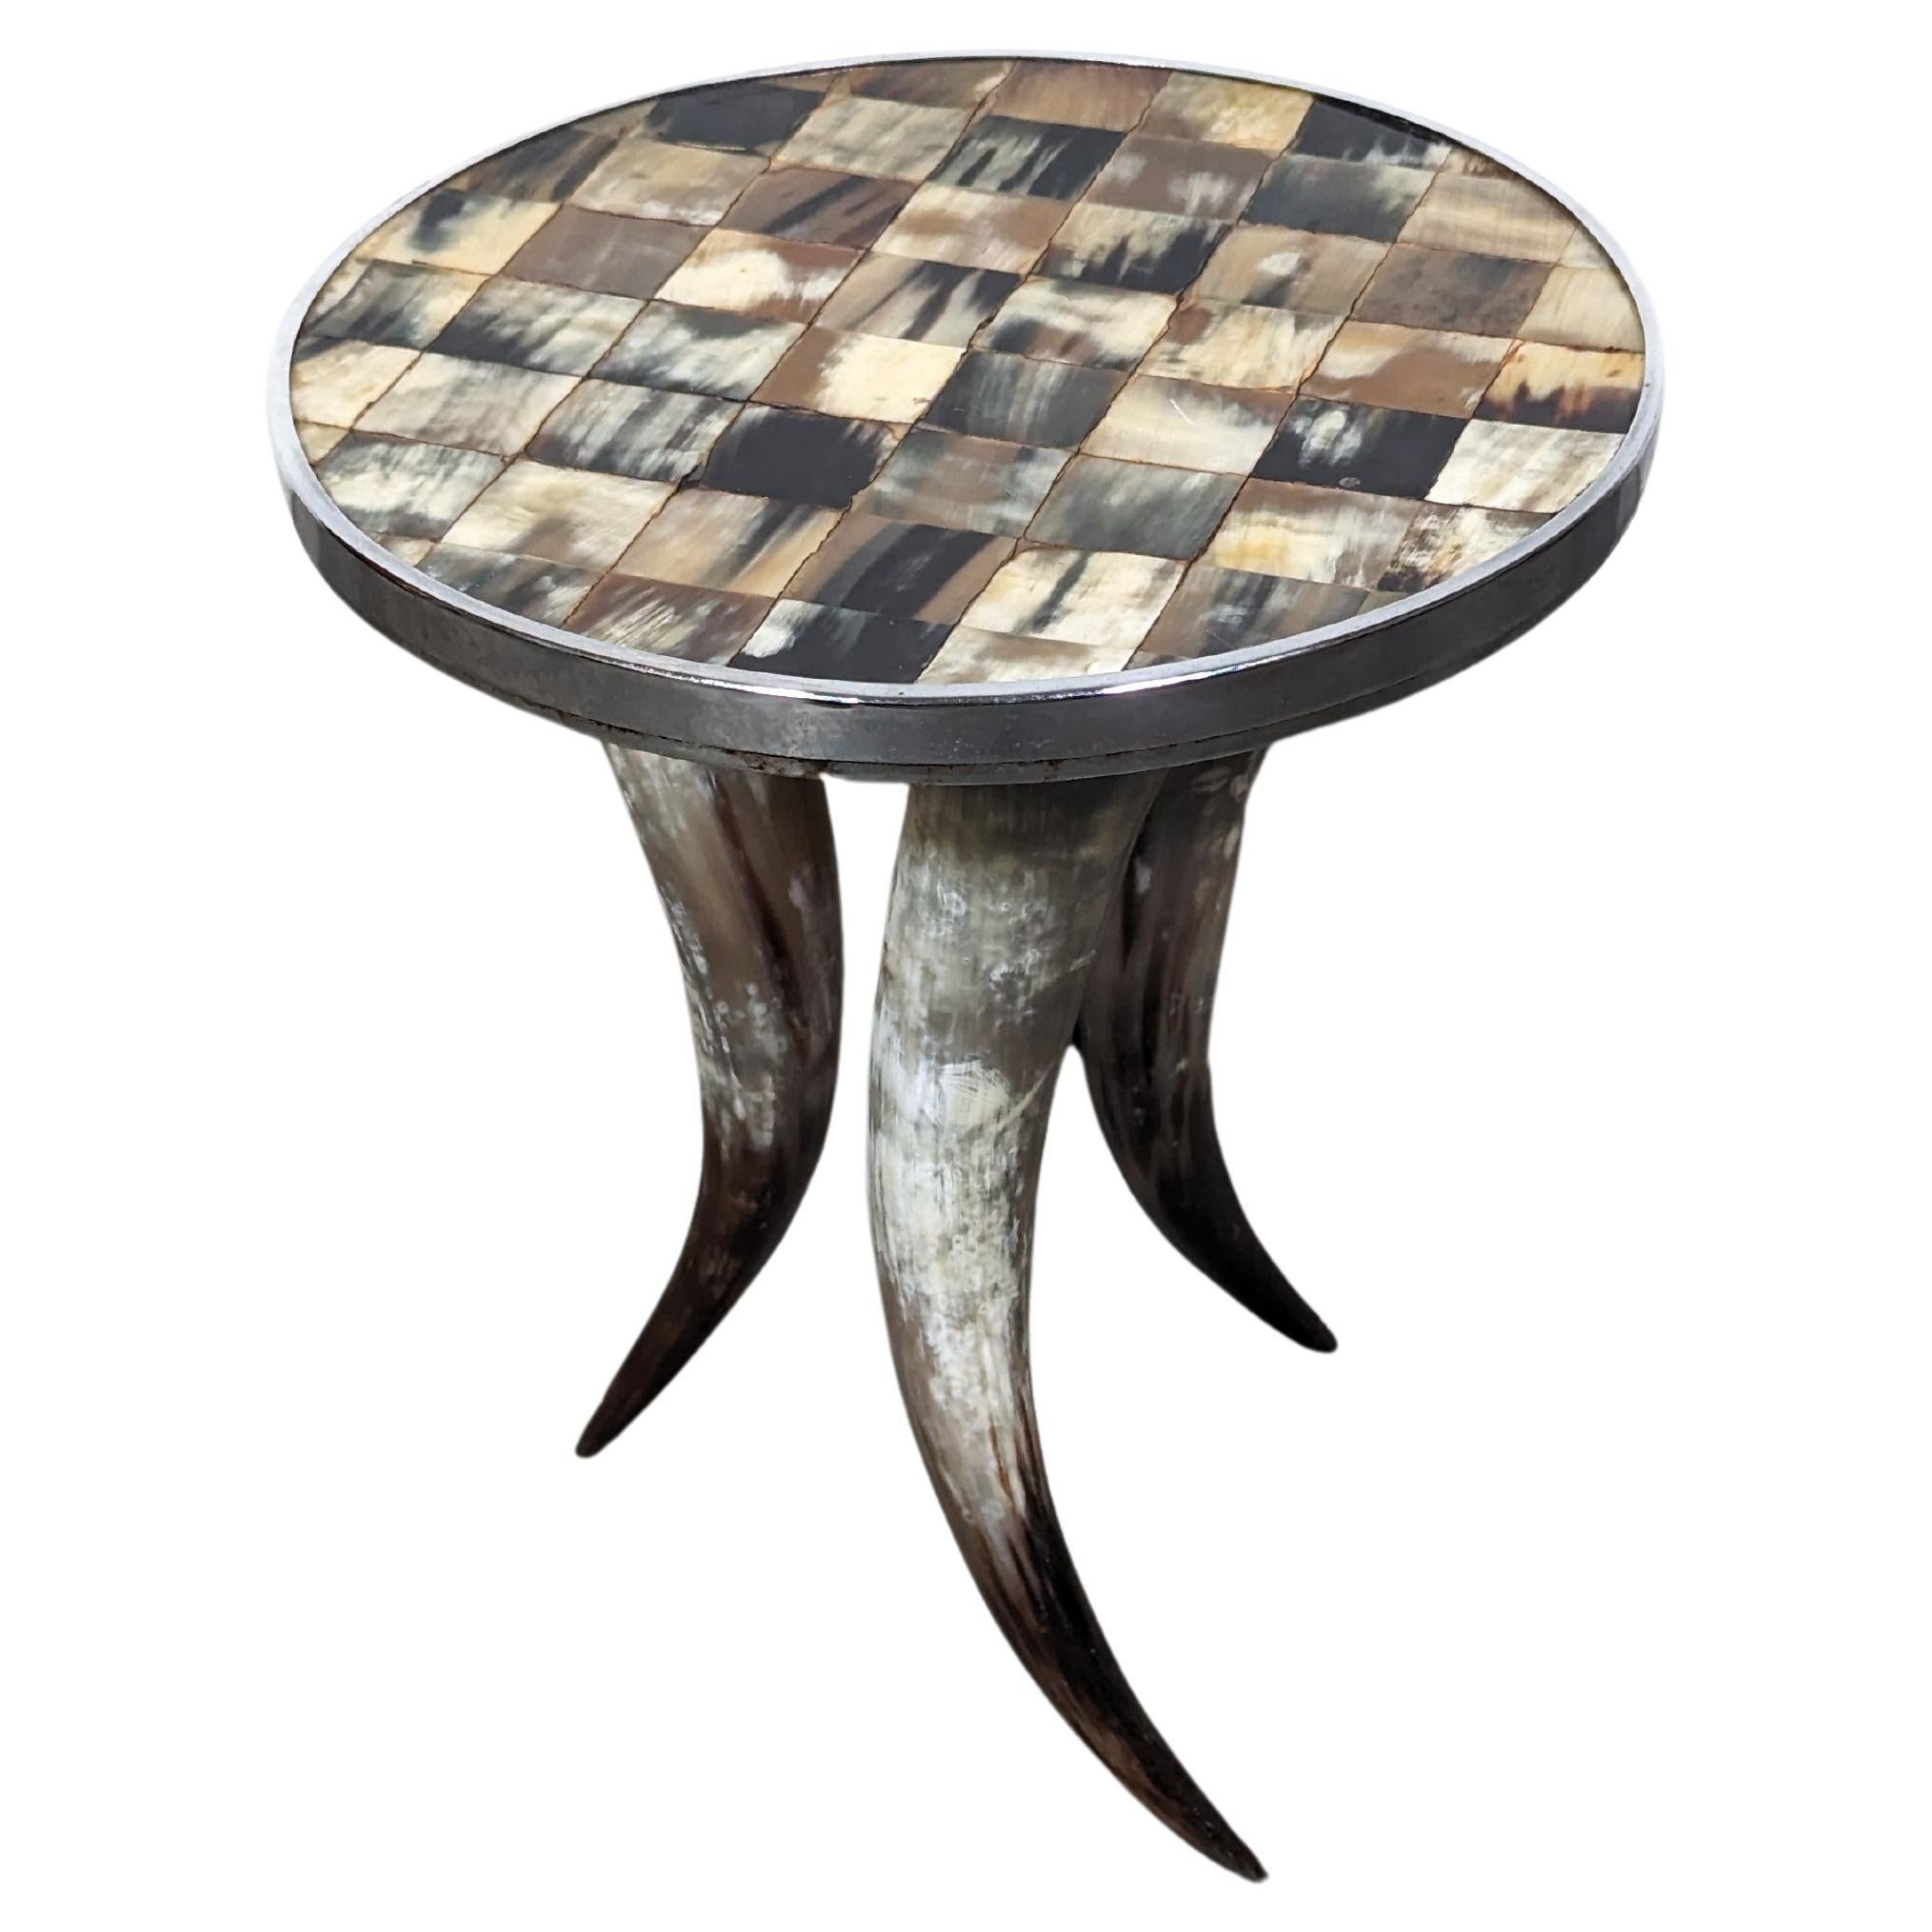 Vintage Tri Legged Horn Side End Table with Tiled Top, c1990s For Sale